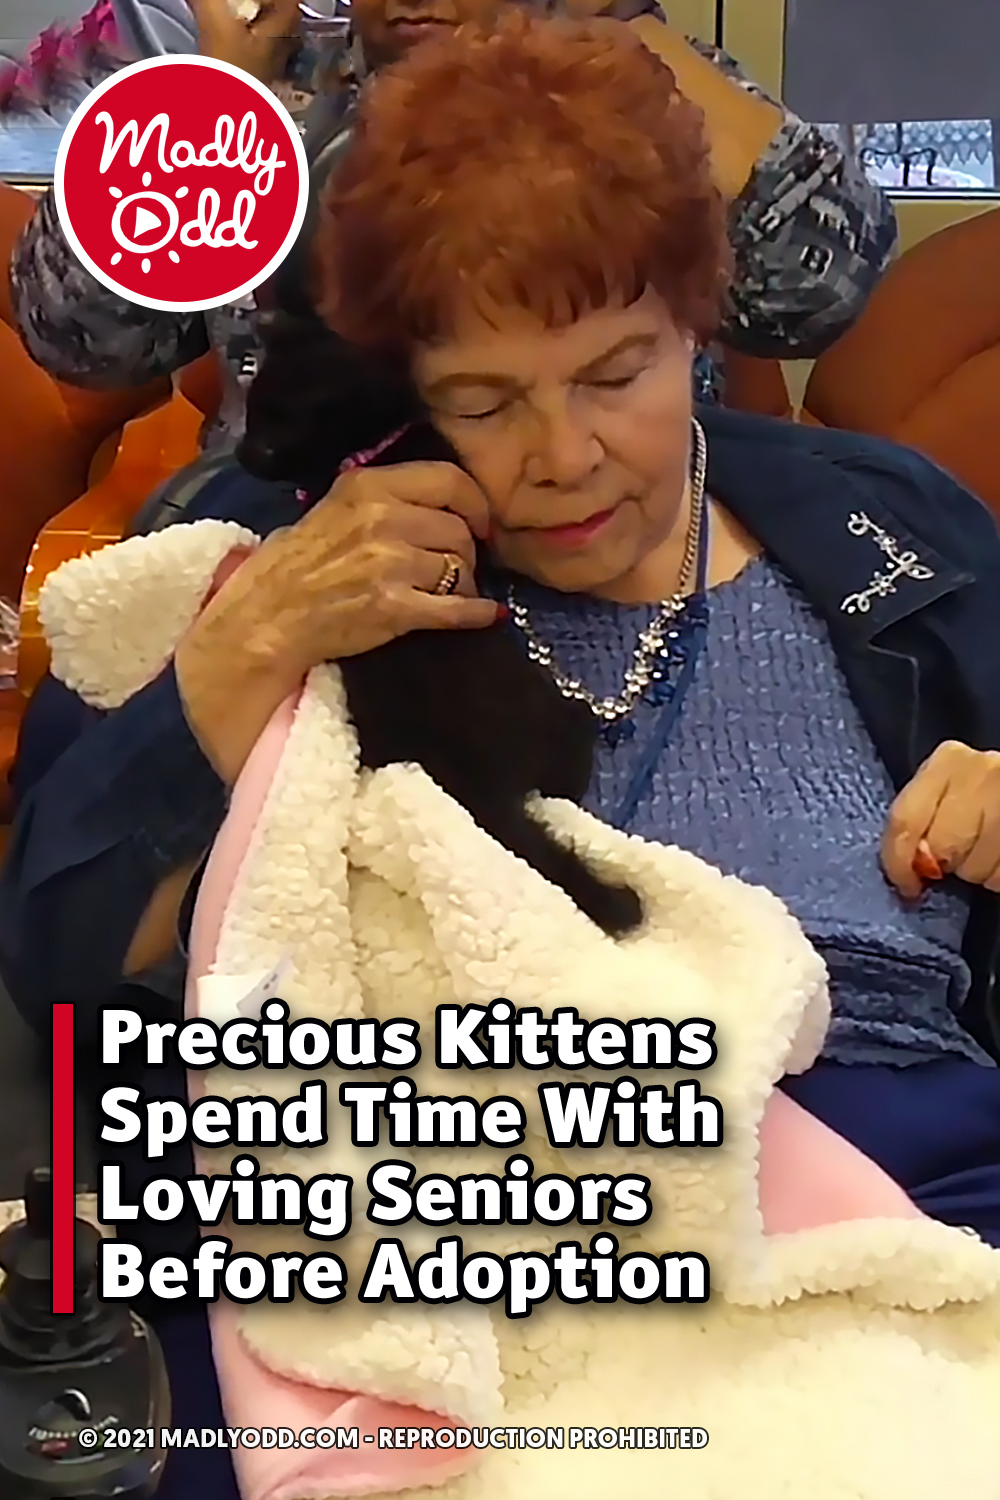 Precious Kittens Spend Time With Loving Seniors Before Adoption